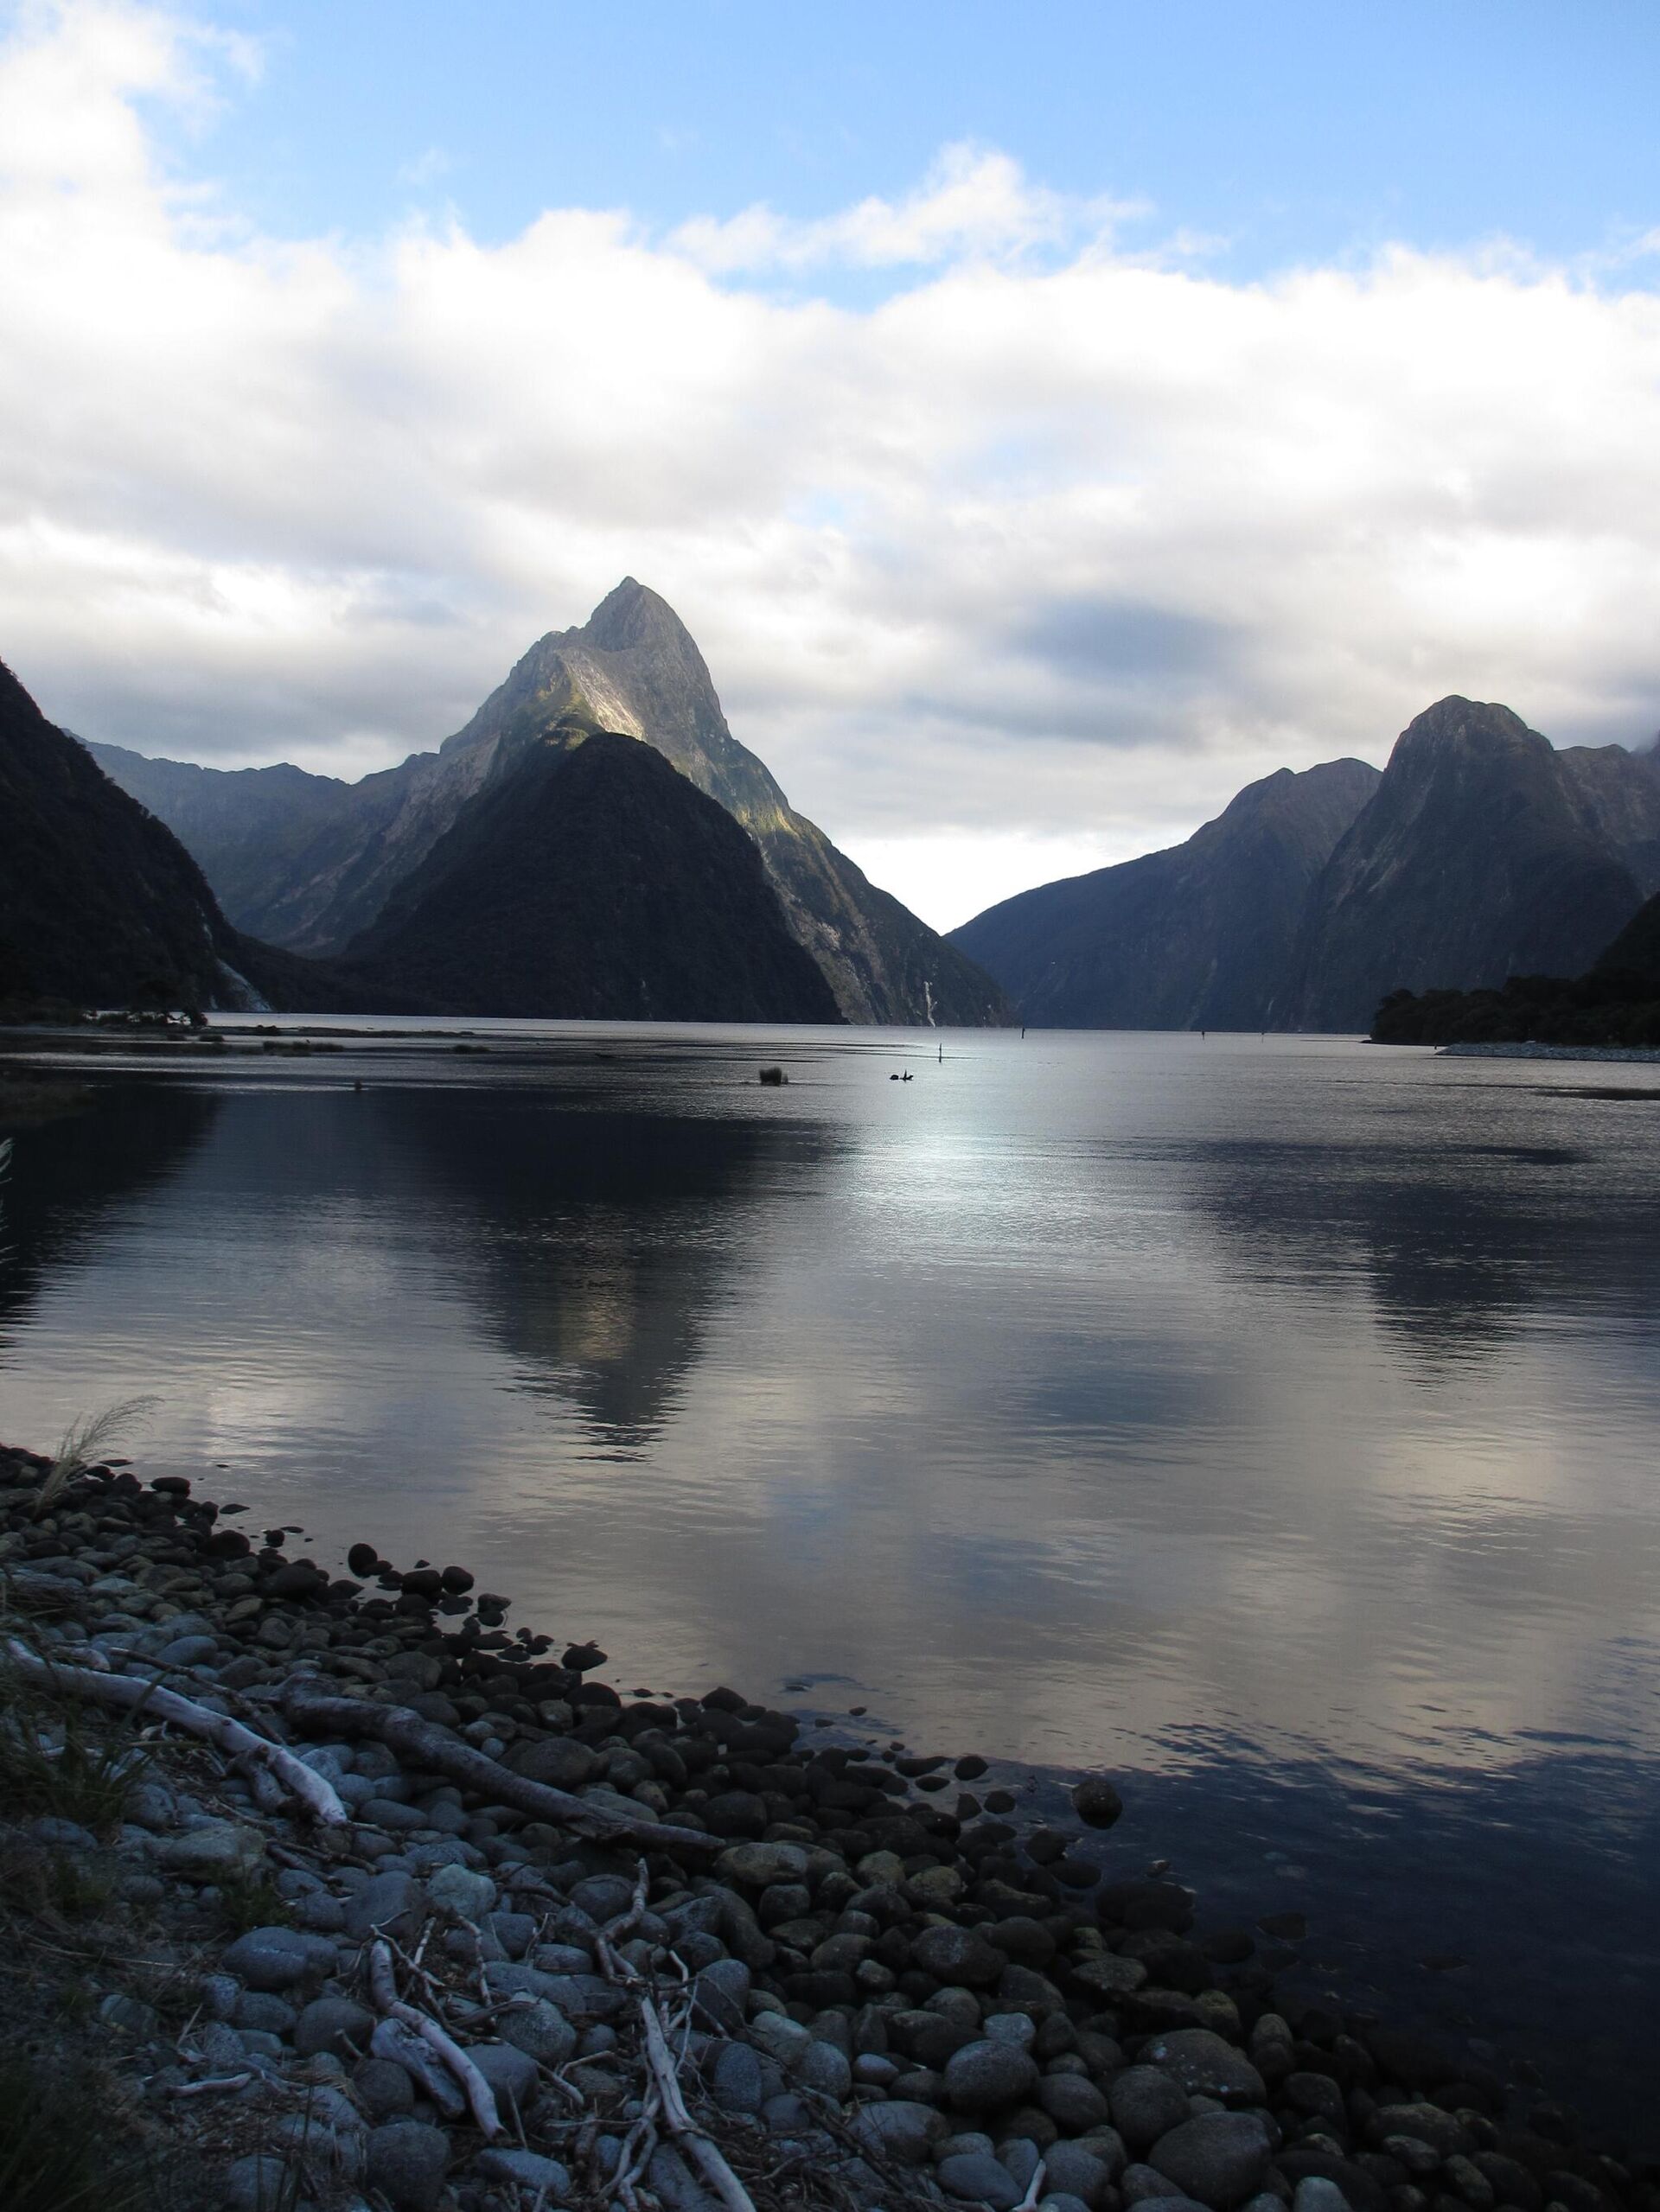 This April 12, 2014 photo shows the iconic Mitre Peak in the Fiordland National Park in Milford Sound, New Zealand. - Sputnik International, 1920, 09.11.2022